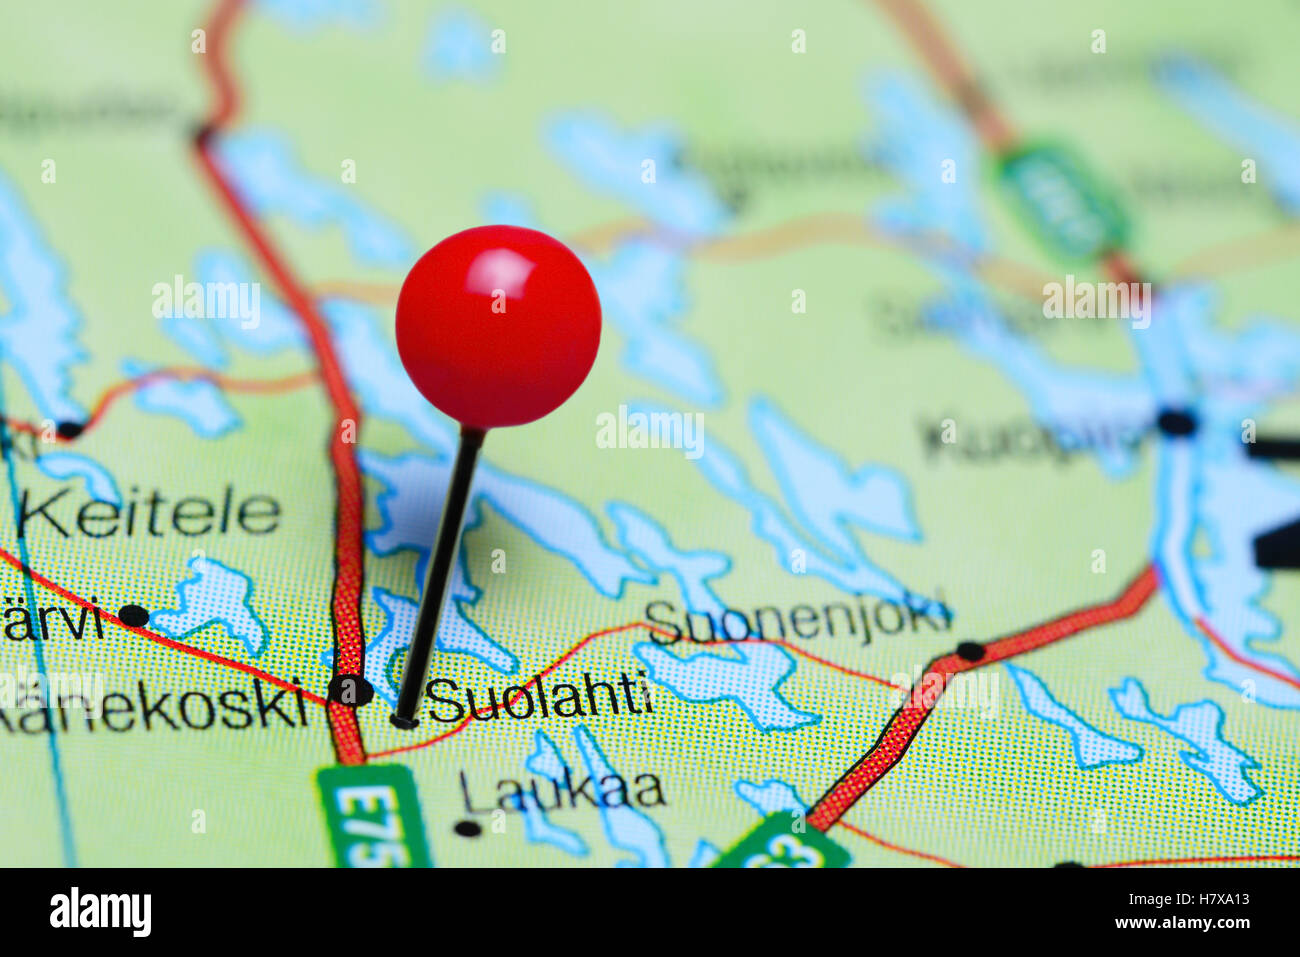 Suolahti pinned on a map of Finland Stock Photo